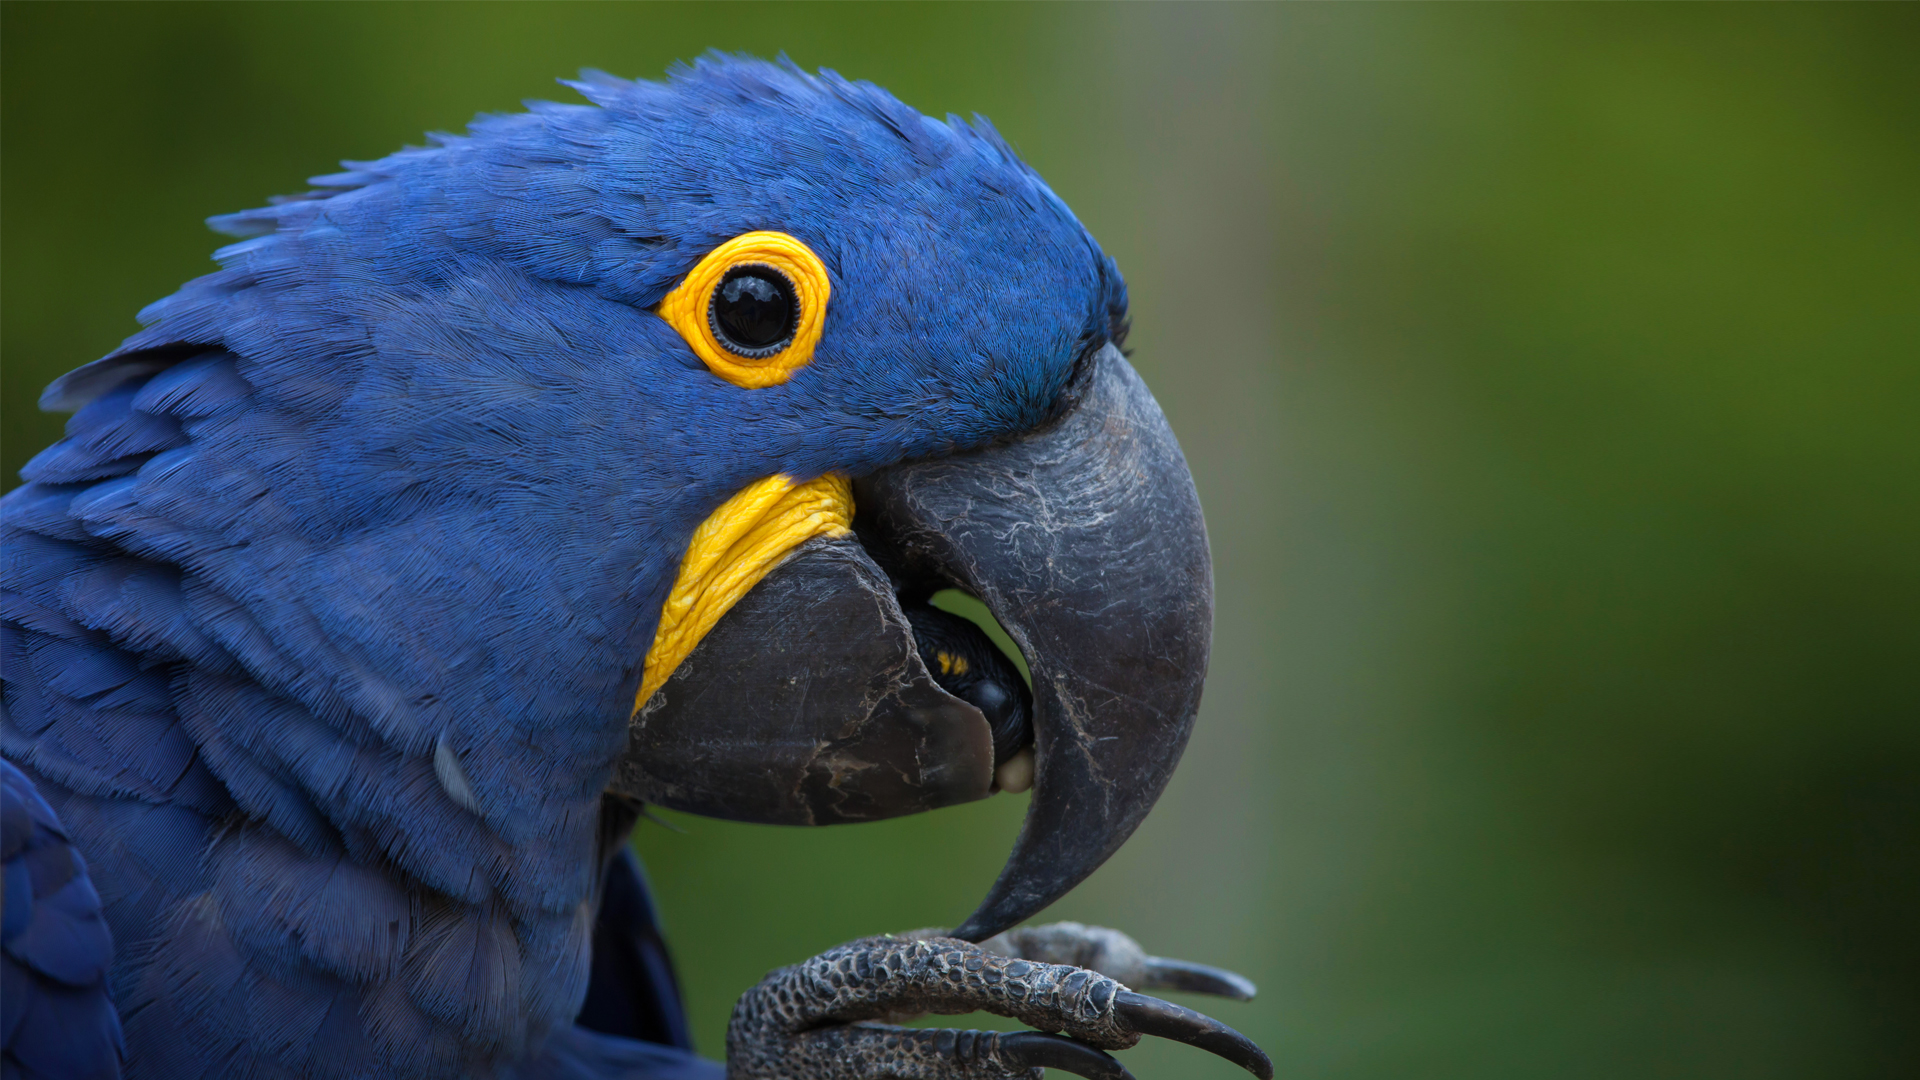 A Day of Wild Macaws